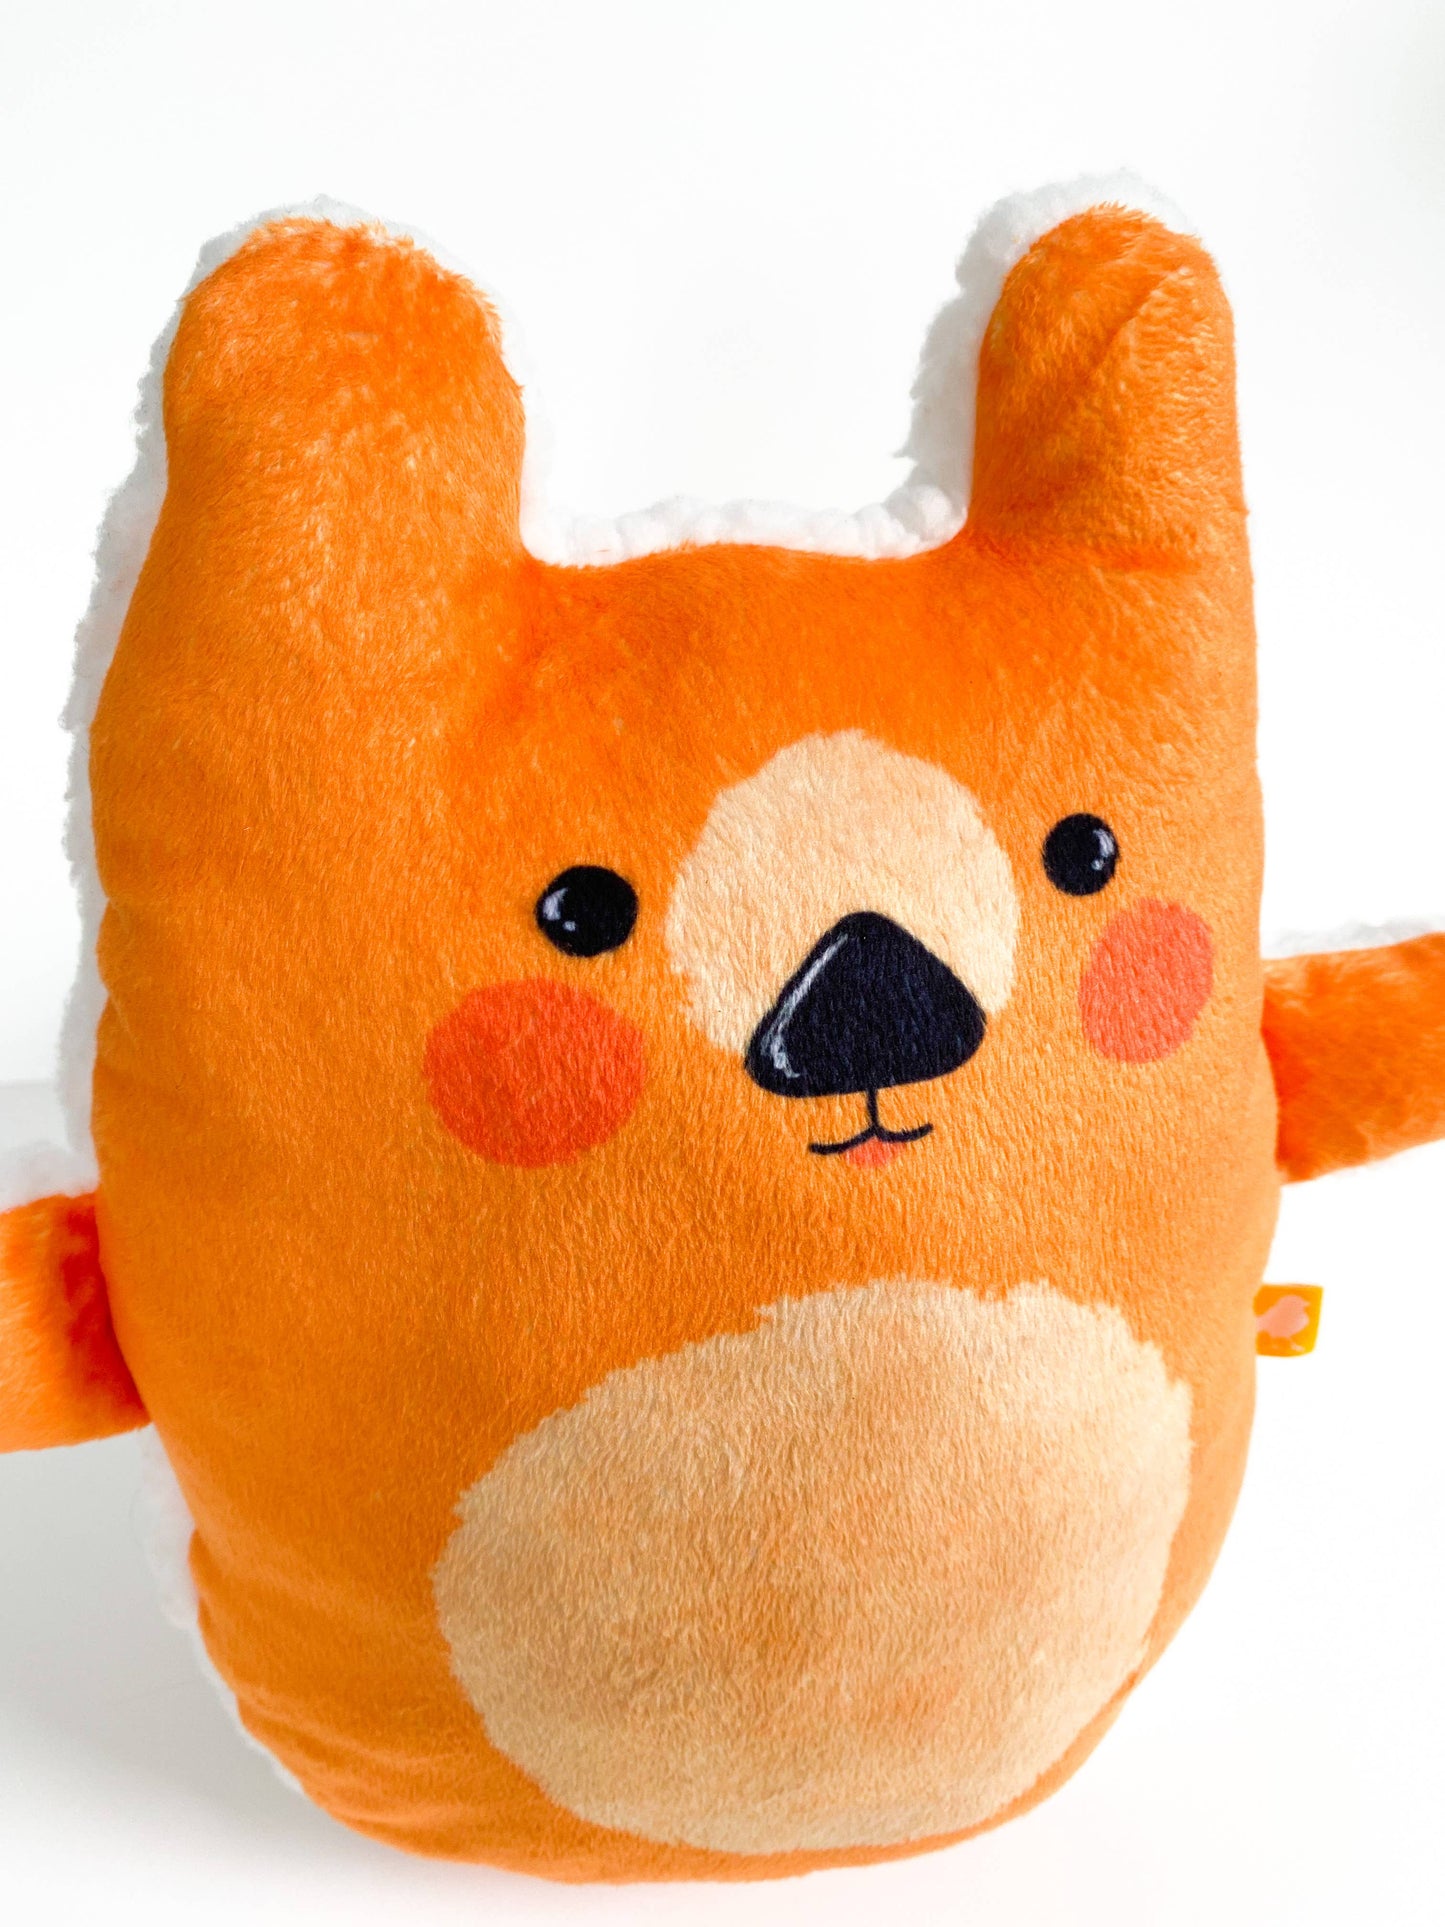 Punkling - "Clementine" - stuffed animal (with pocket!)